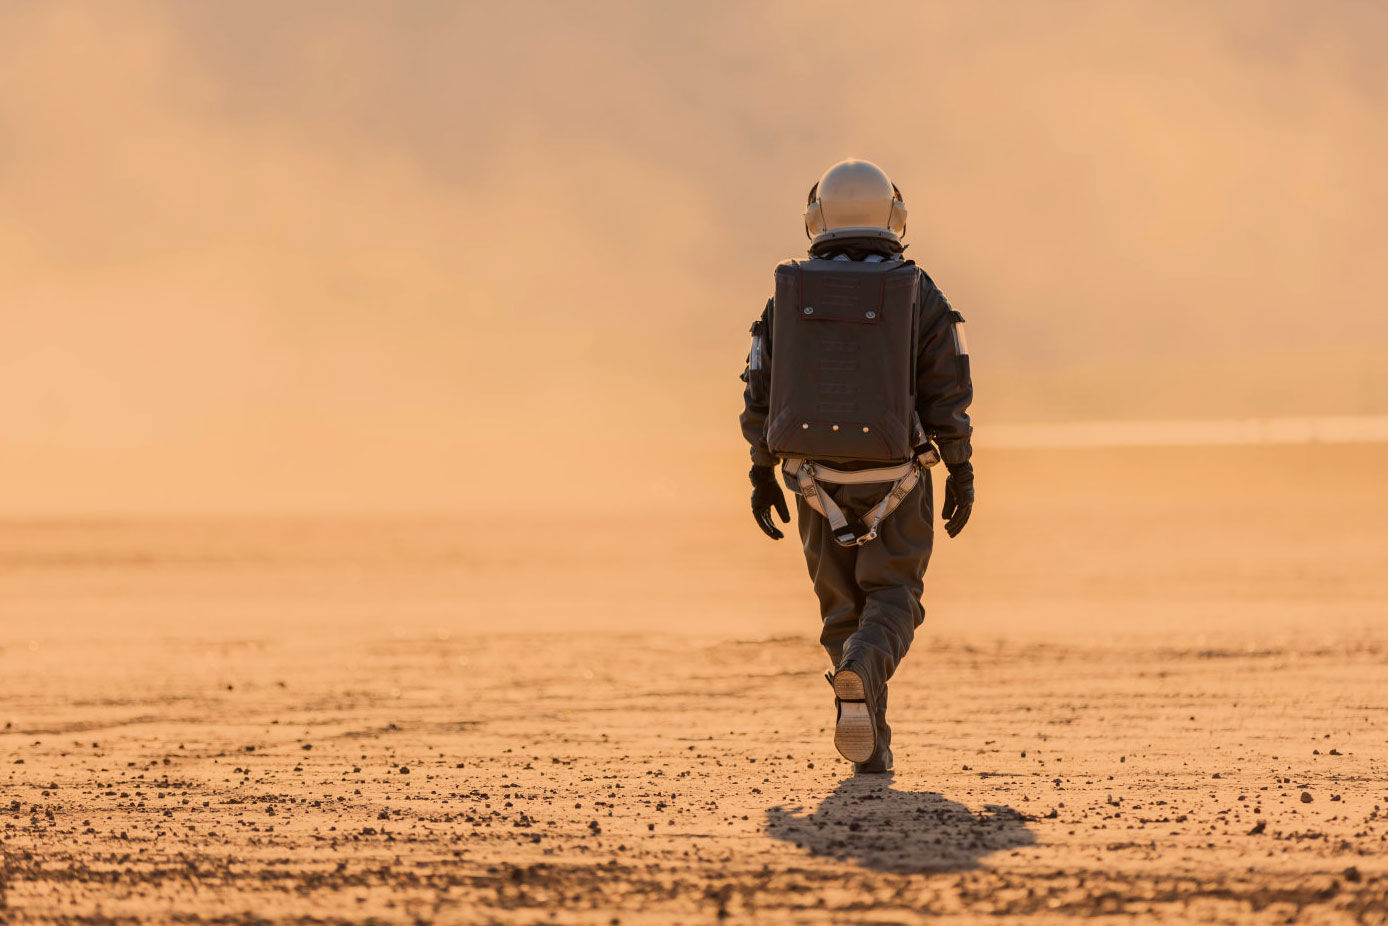 Mars One, the overly ambitious project to colonize the Red Planet, has gone bankrupt